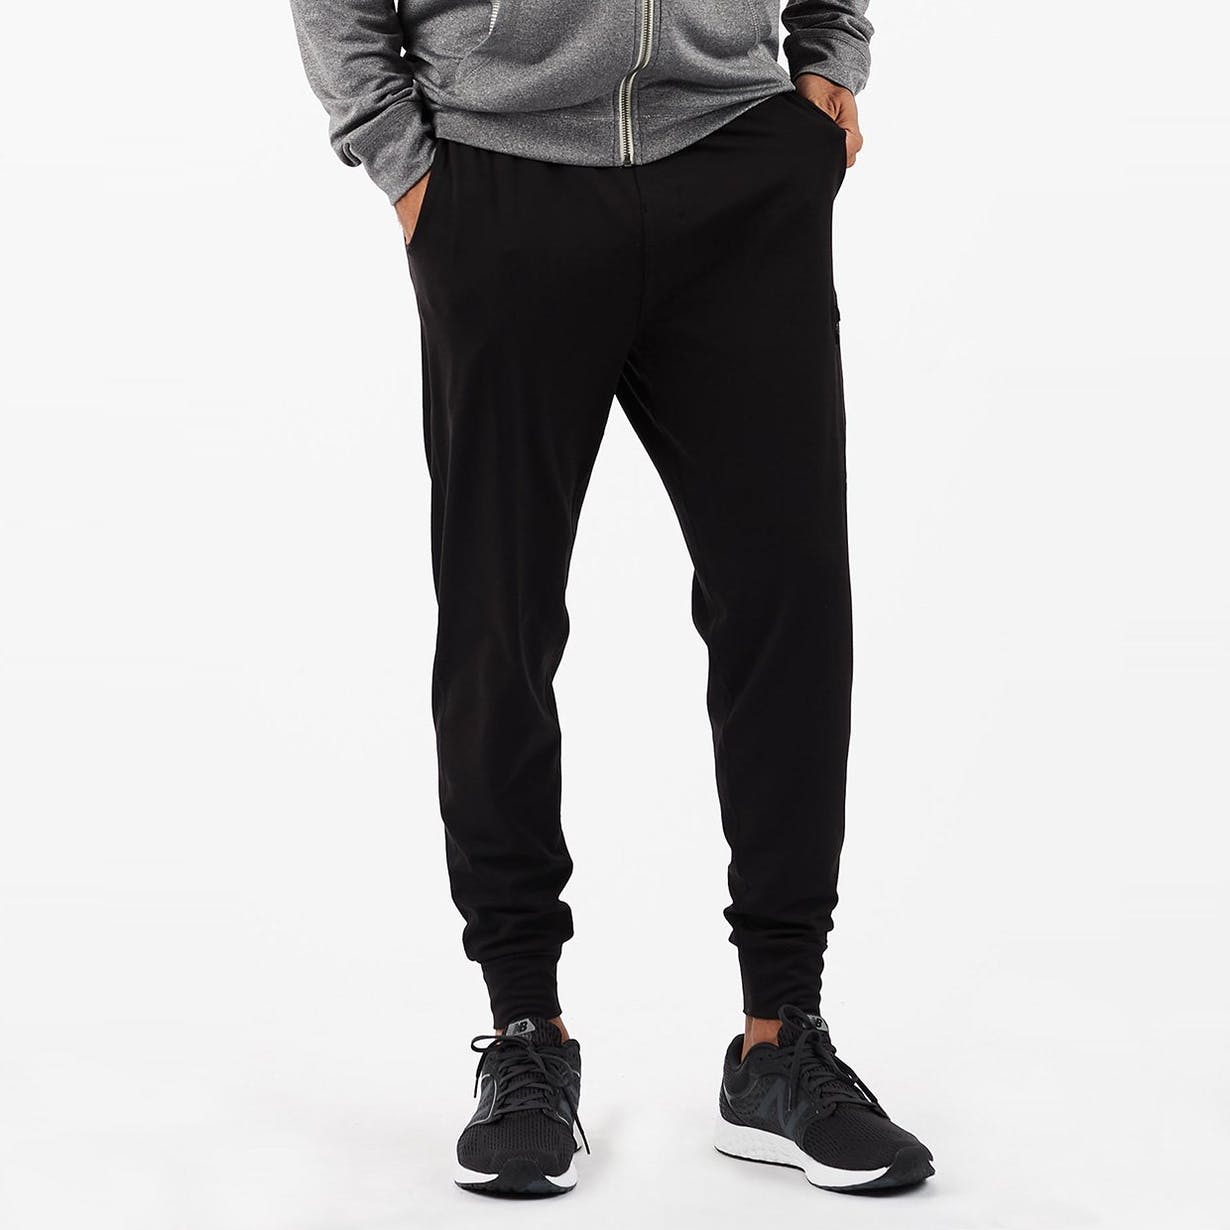 homines jogger 7